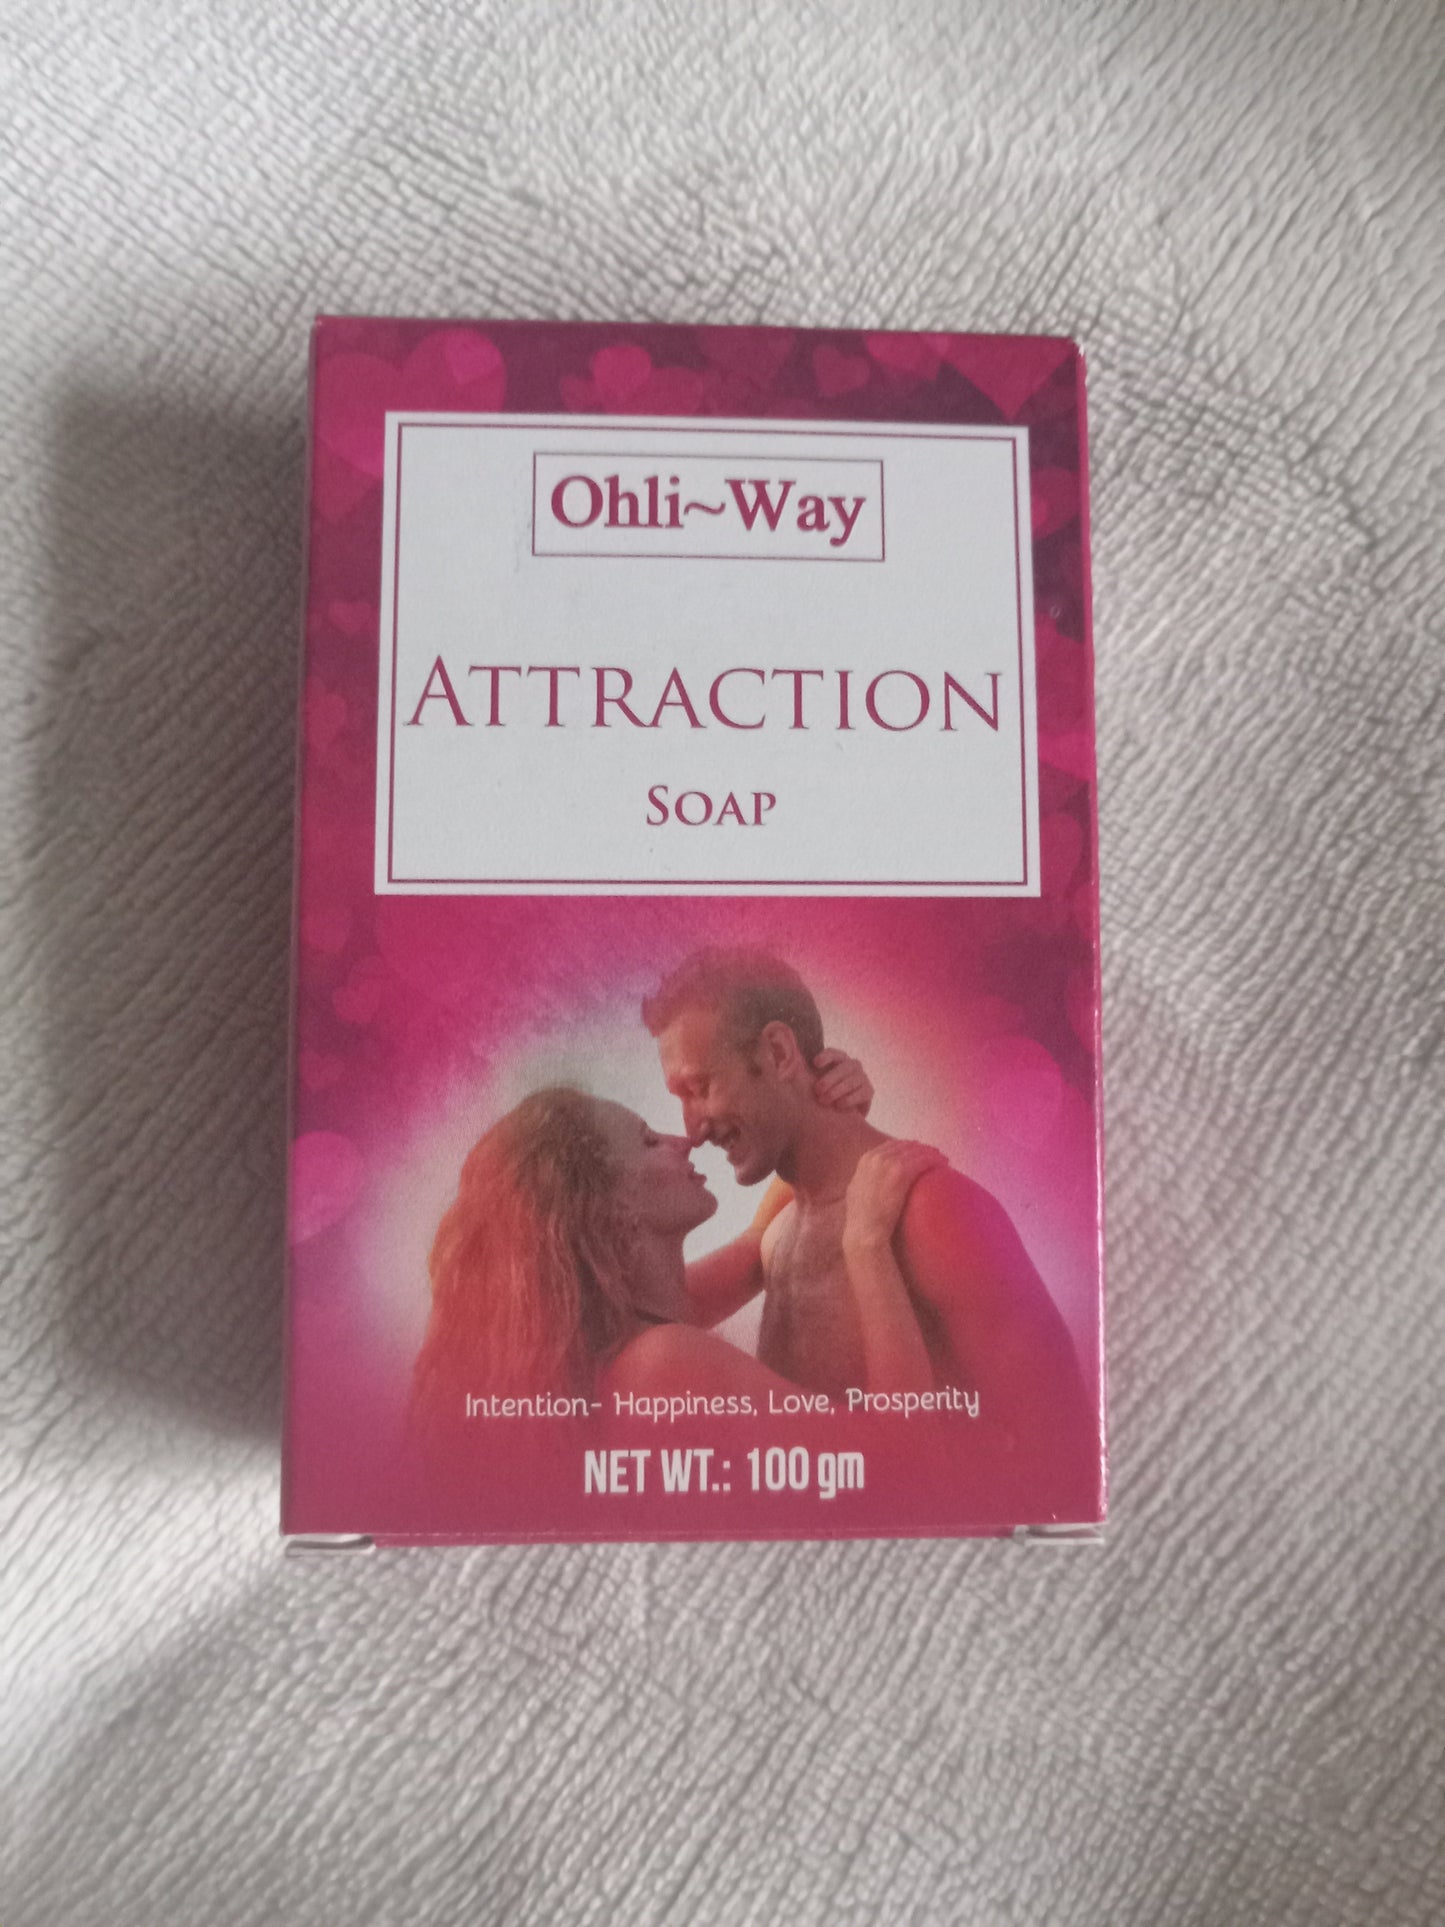  Attraction Soap -  available at Amazing Creations Products . Grab yours for $5.50 today!